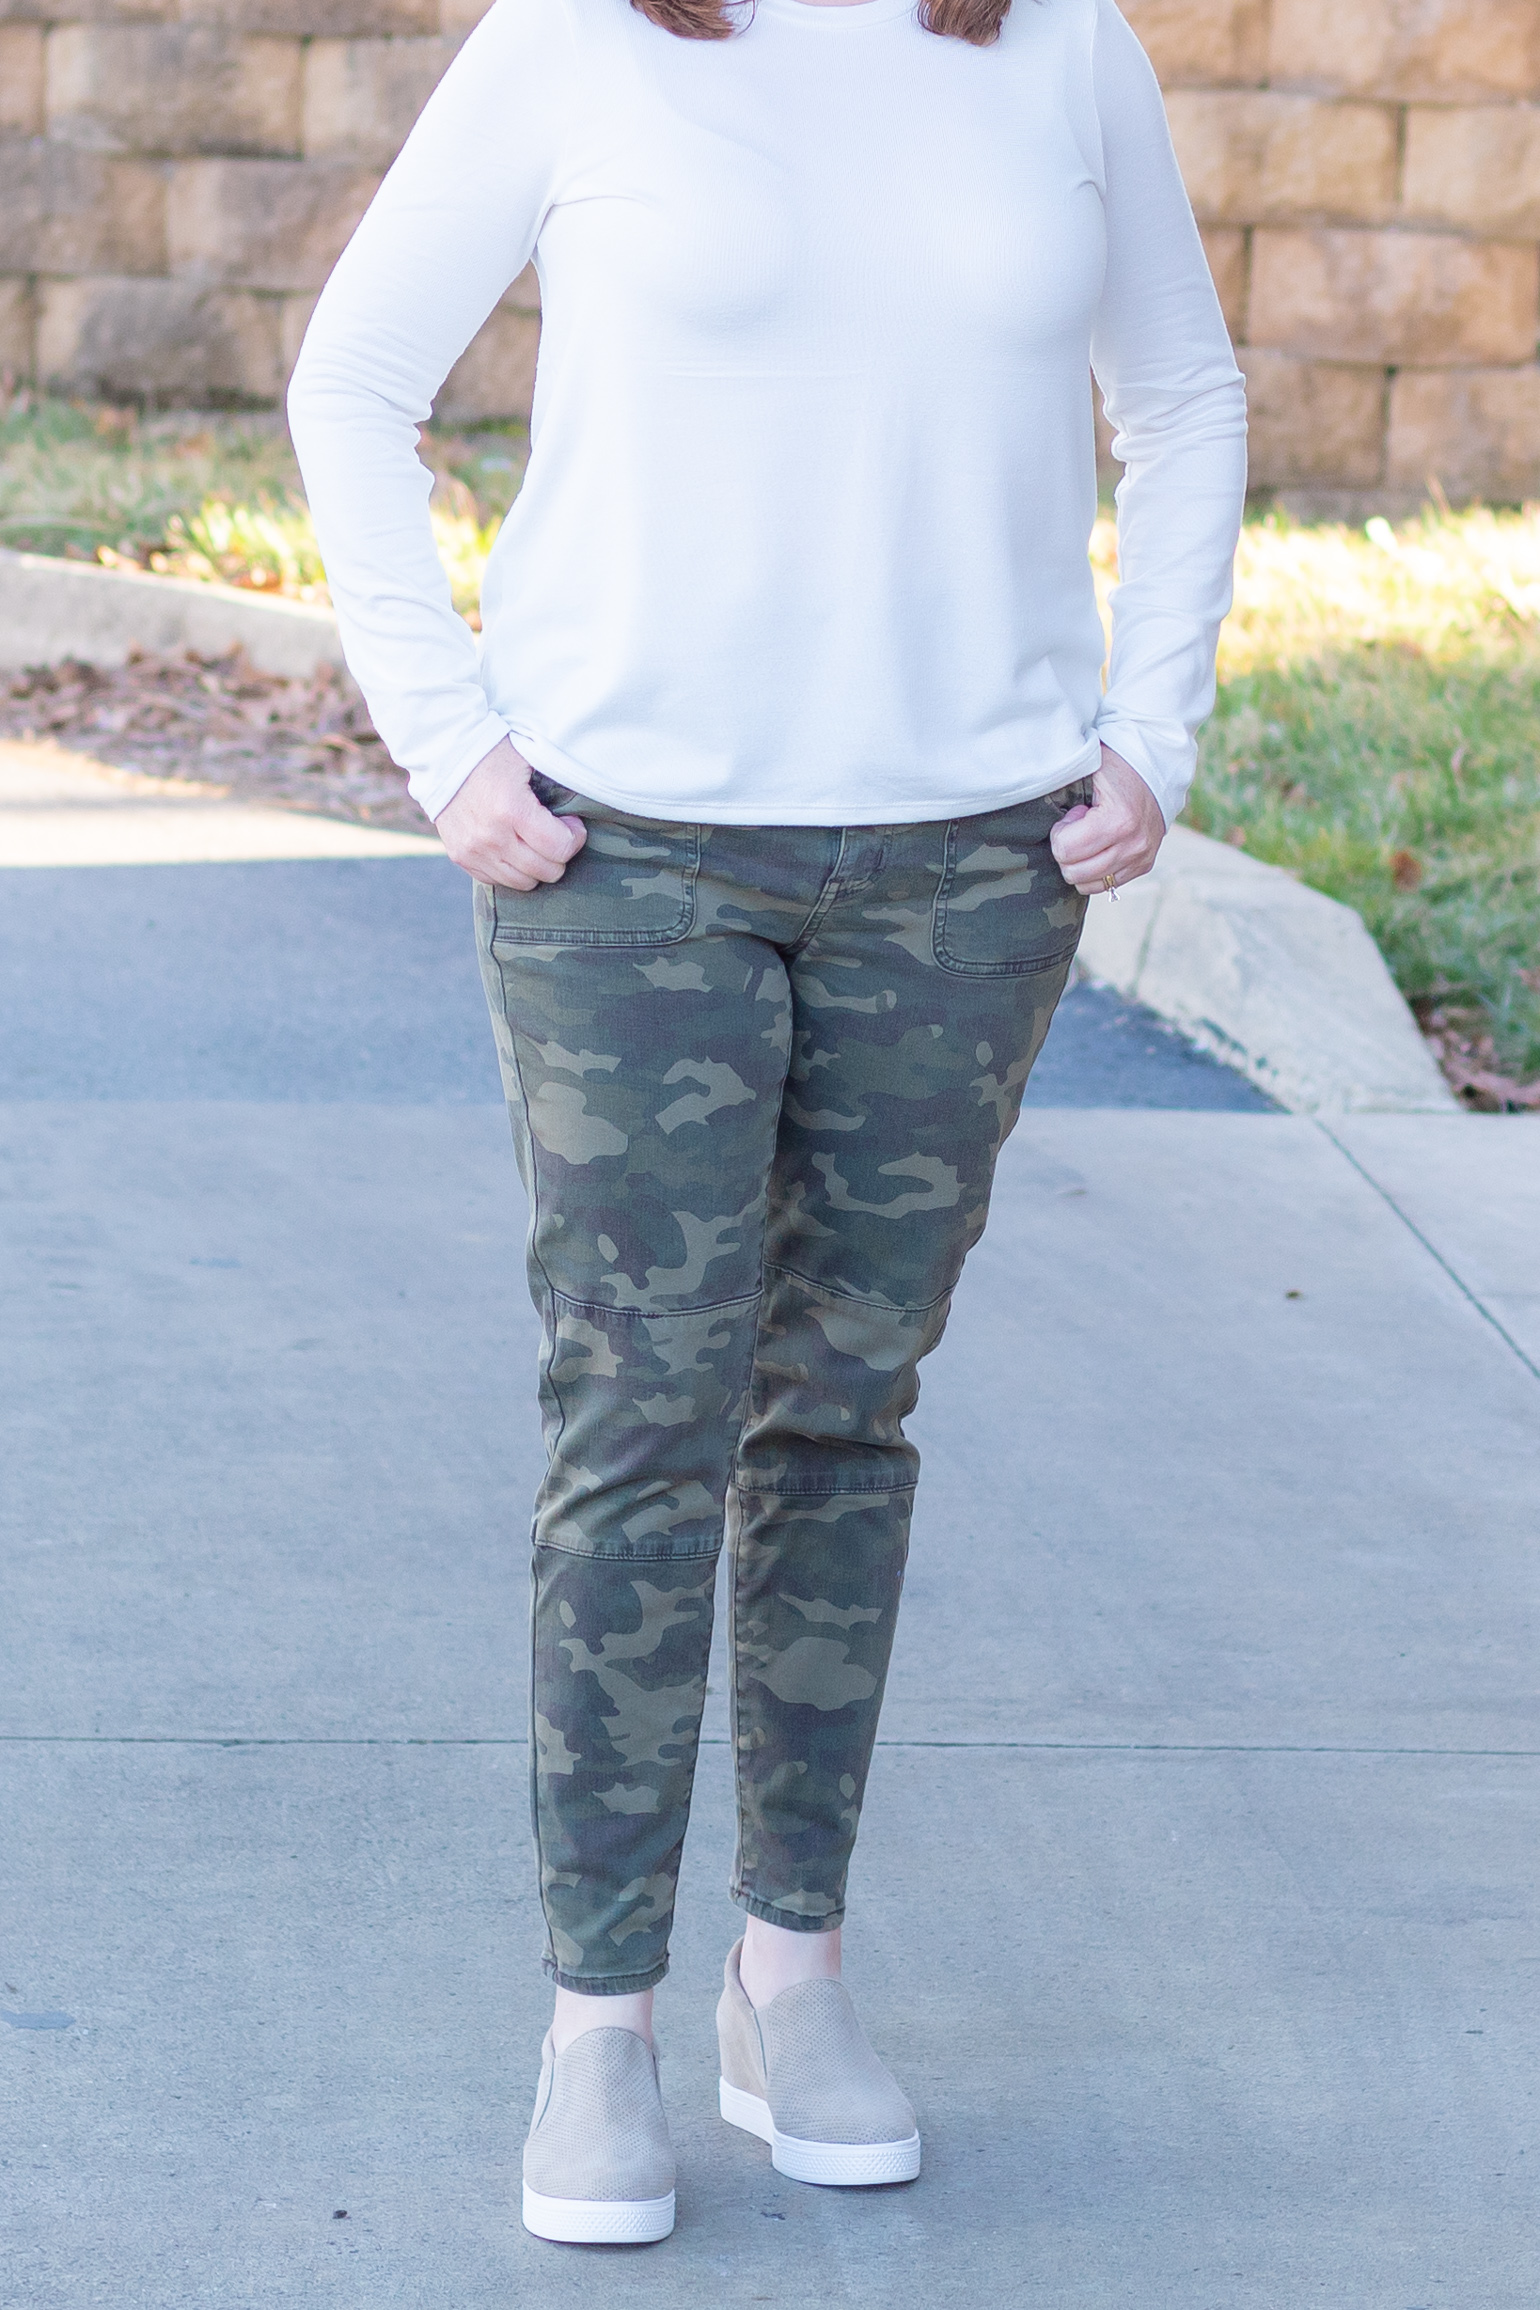 Camo Pants 3 Ways - Outfit #1 - Dressed in Faith